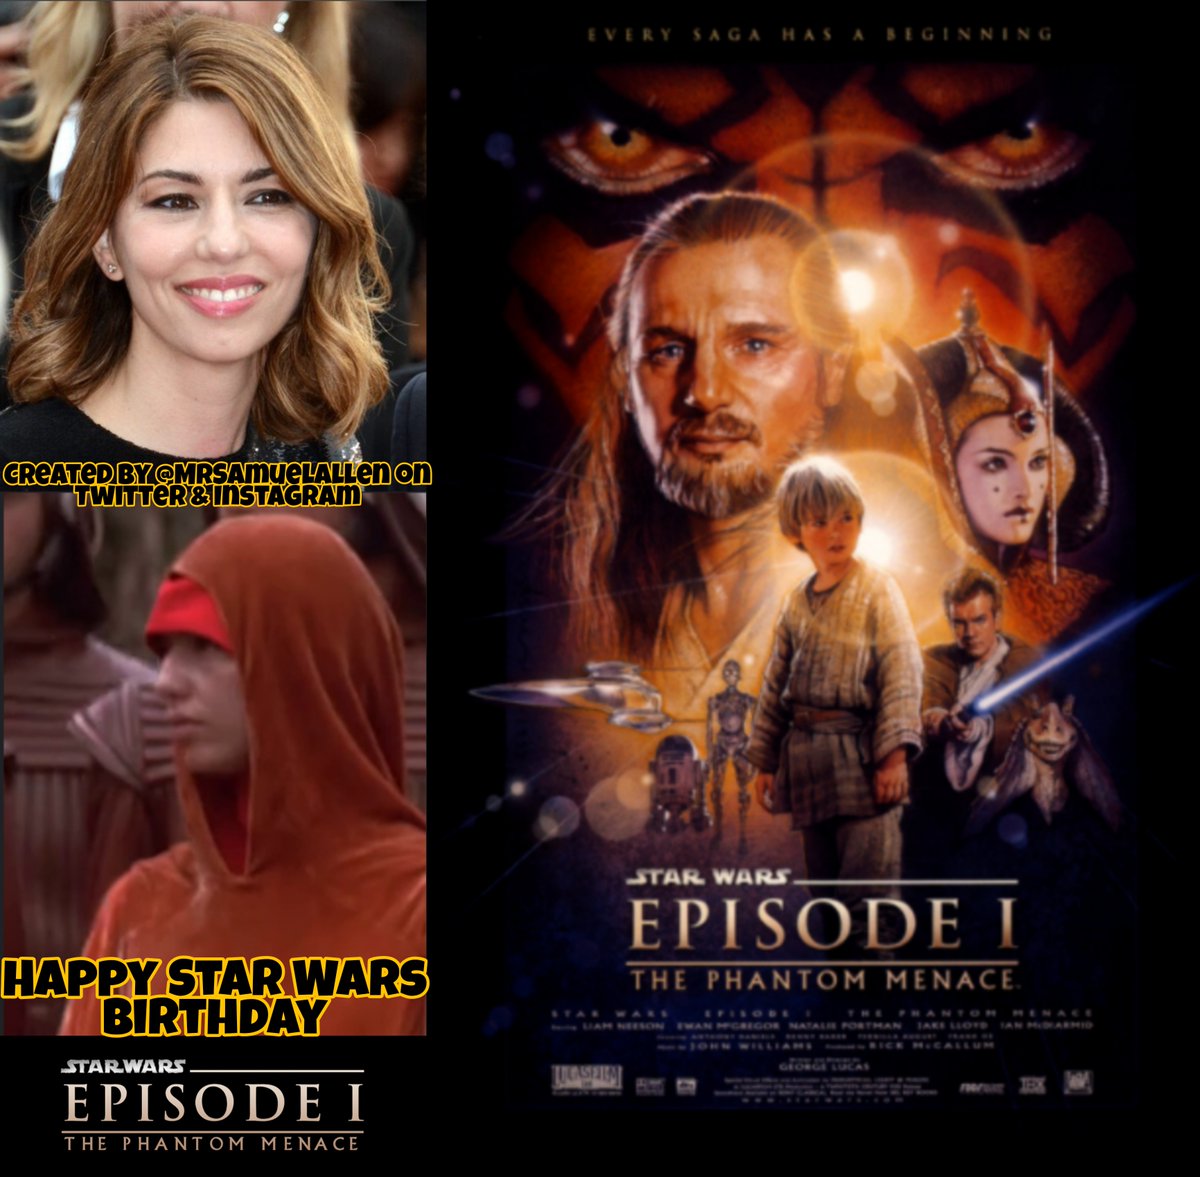 Happy Birthday to #SofiaCoppola, she played Saché, one of Queen Amidala's handmaidens in #StarWars #ThePhantomMenace. May she have a good one.